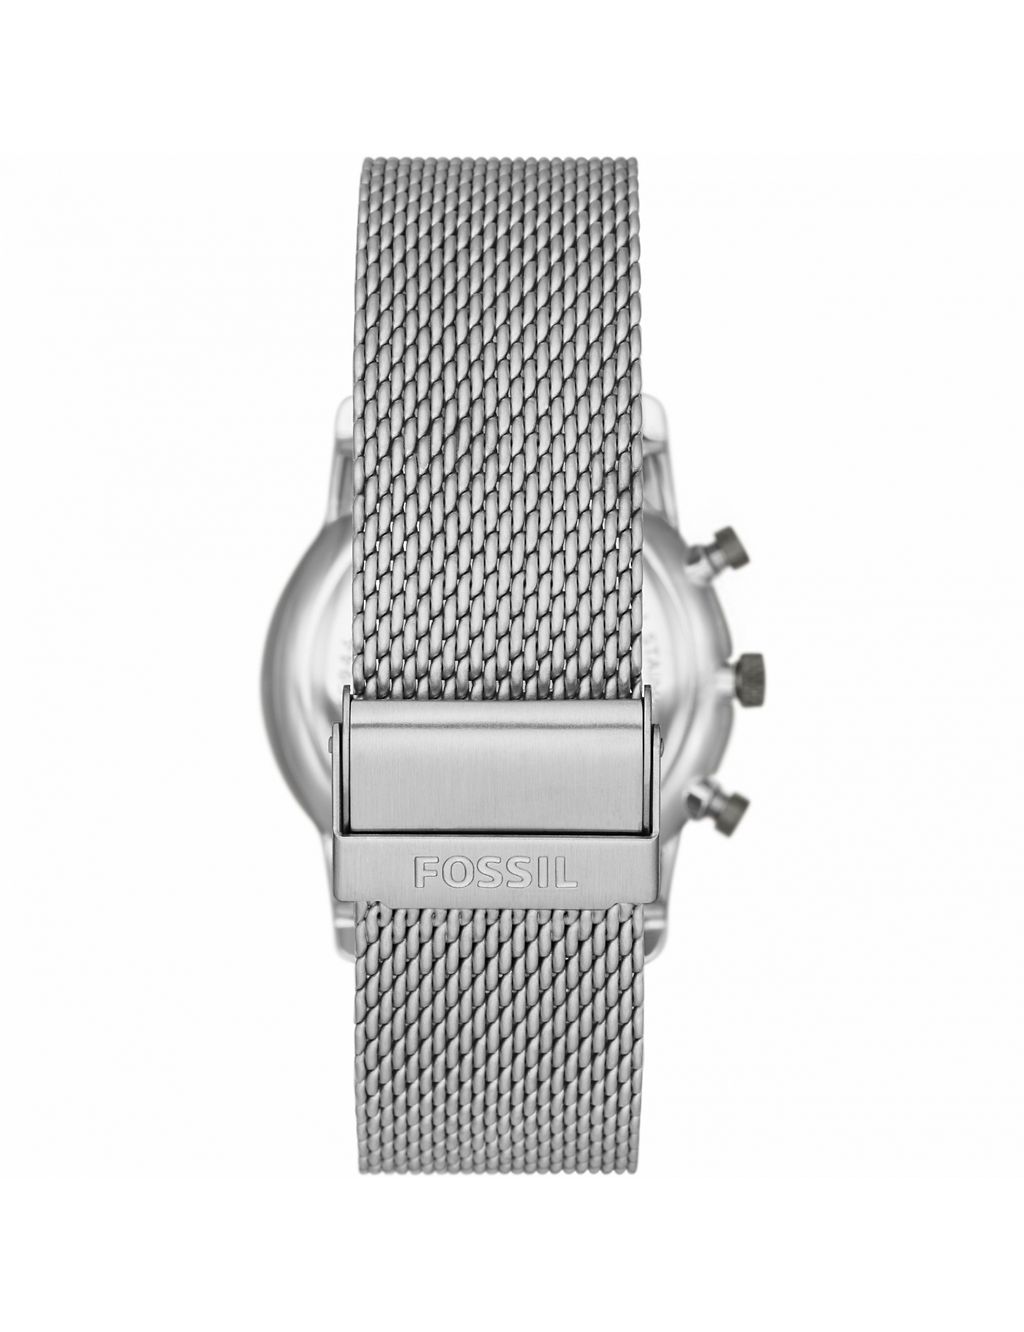 Fossil Minimalist Stainless Steel Watch 1 of 5